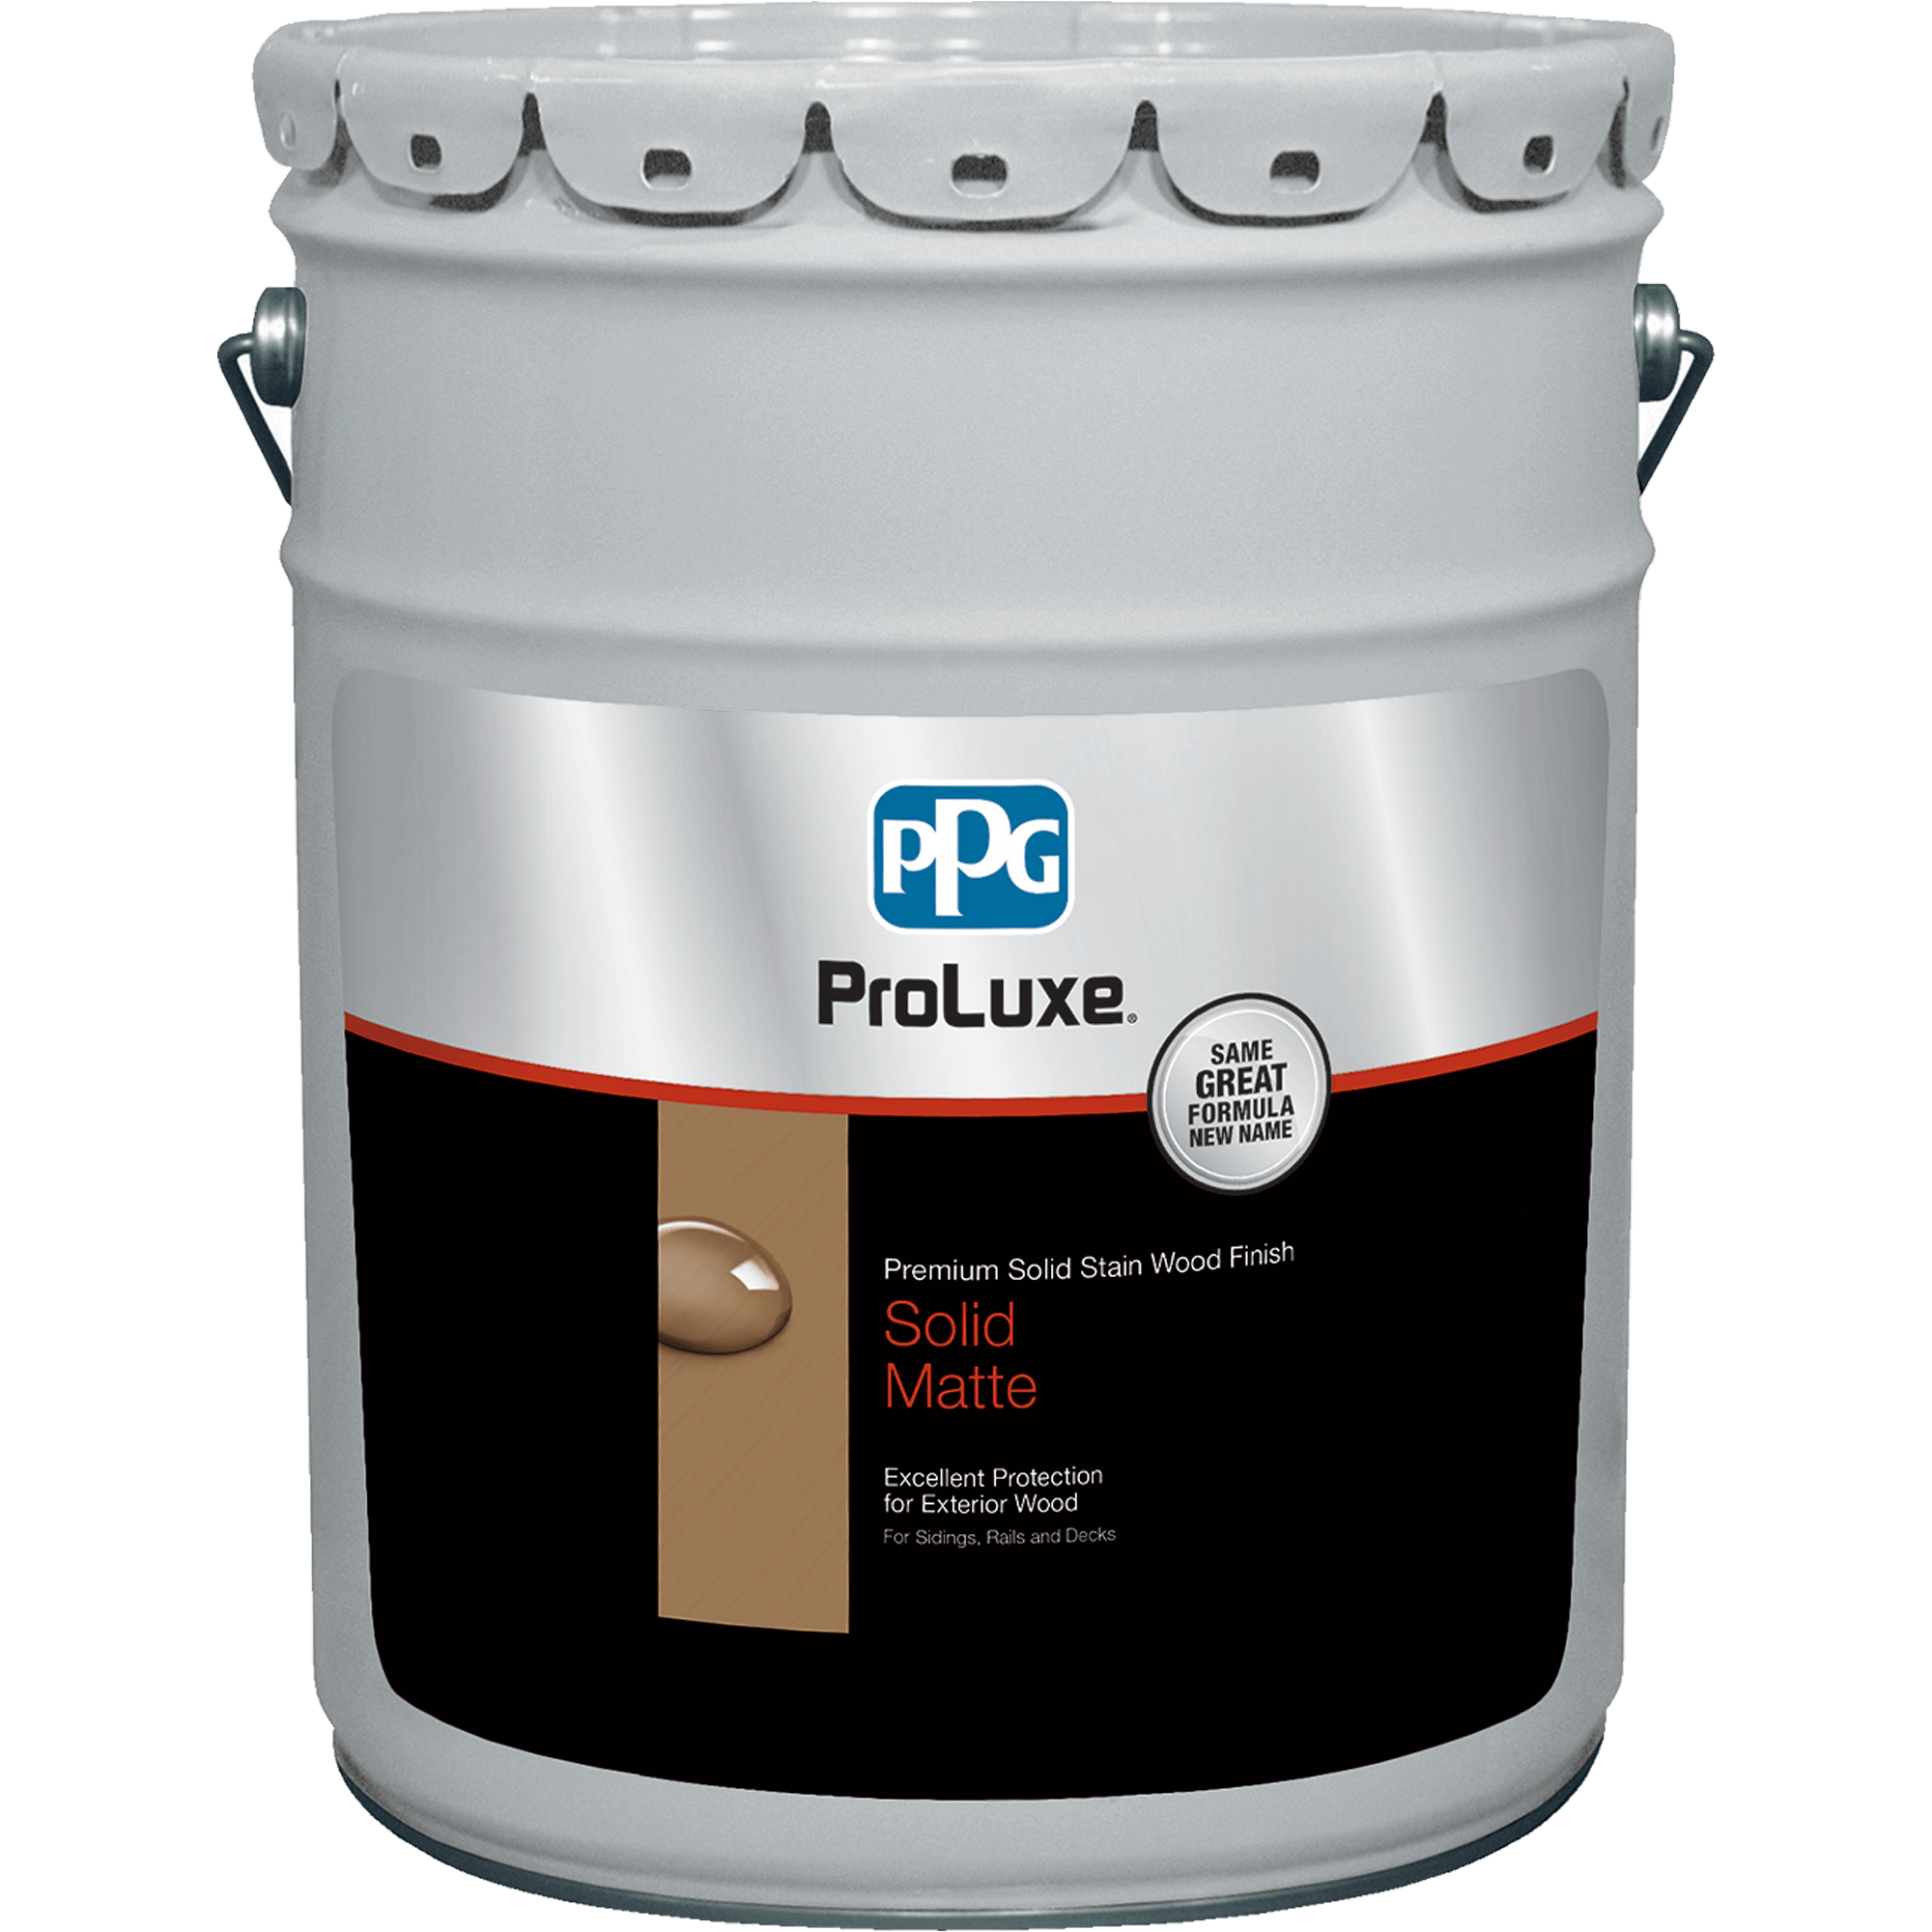 PROLUXE<sup>®</sup> Premium Solid Stain Wood Finish 5 Gallon